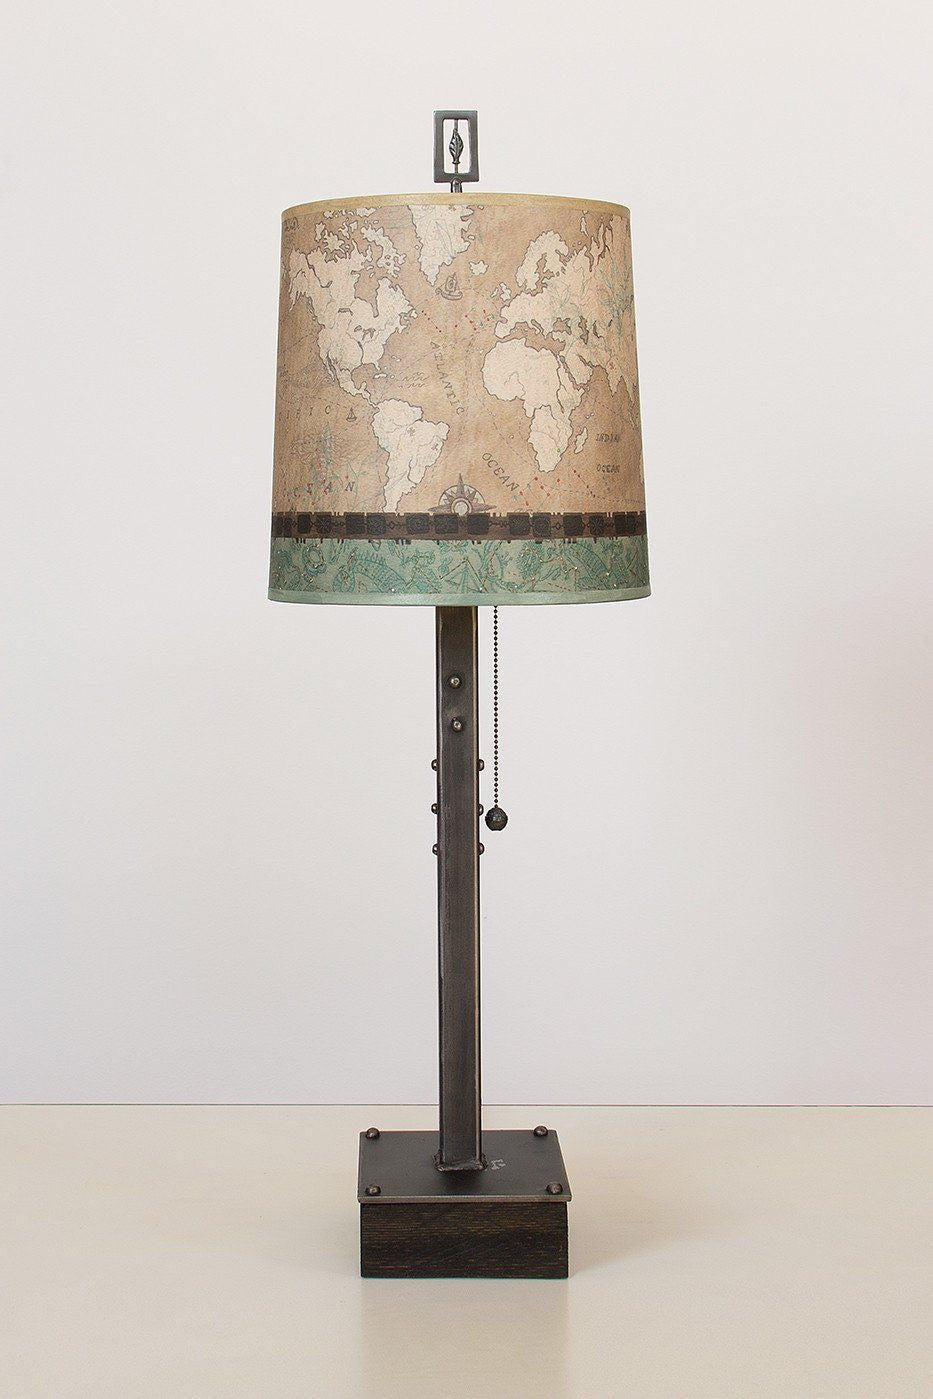 Janna Ugone &amp; Co Table Lamps Steel Table Lamp on Wood with Medium Drum Shade in Voyages